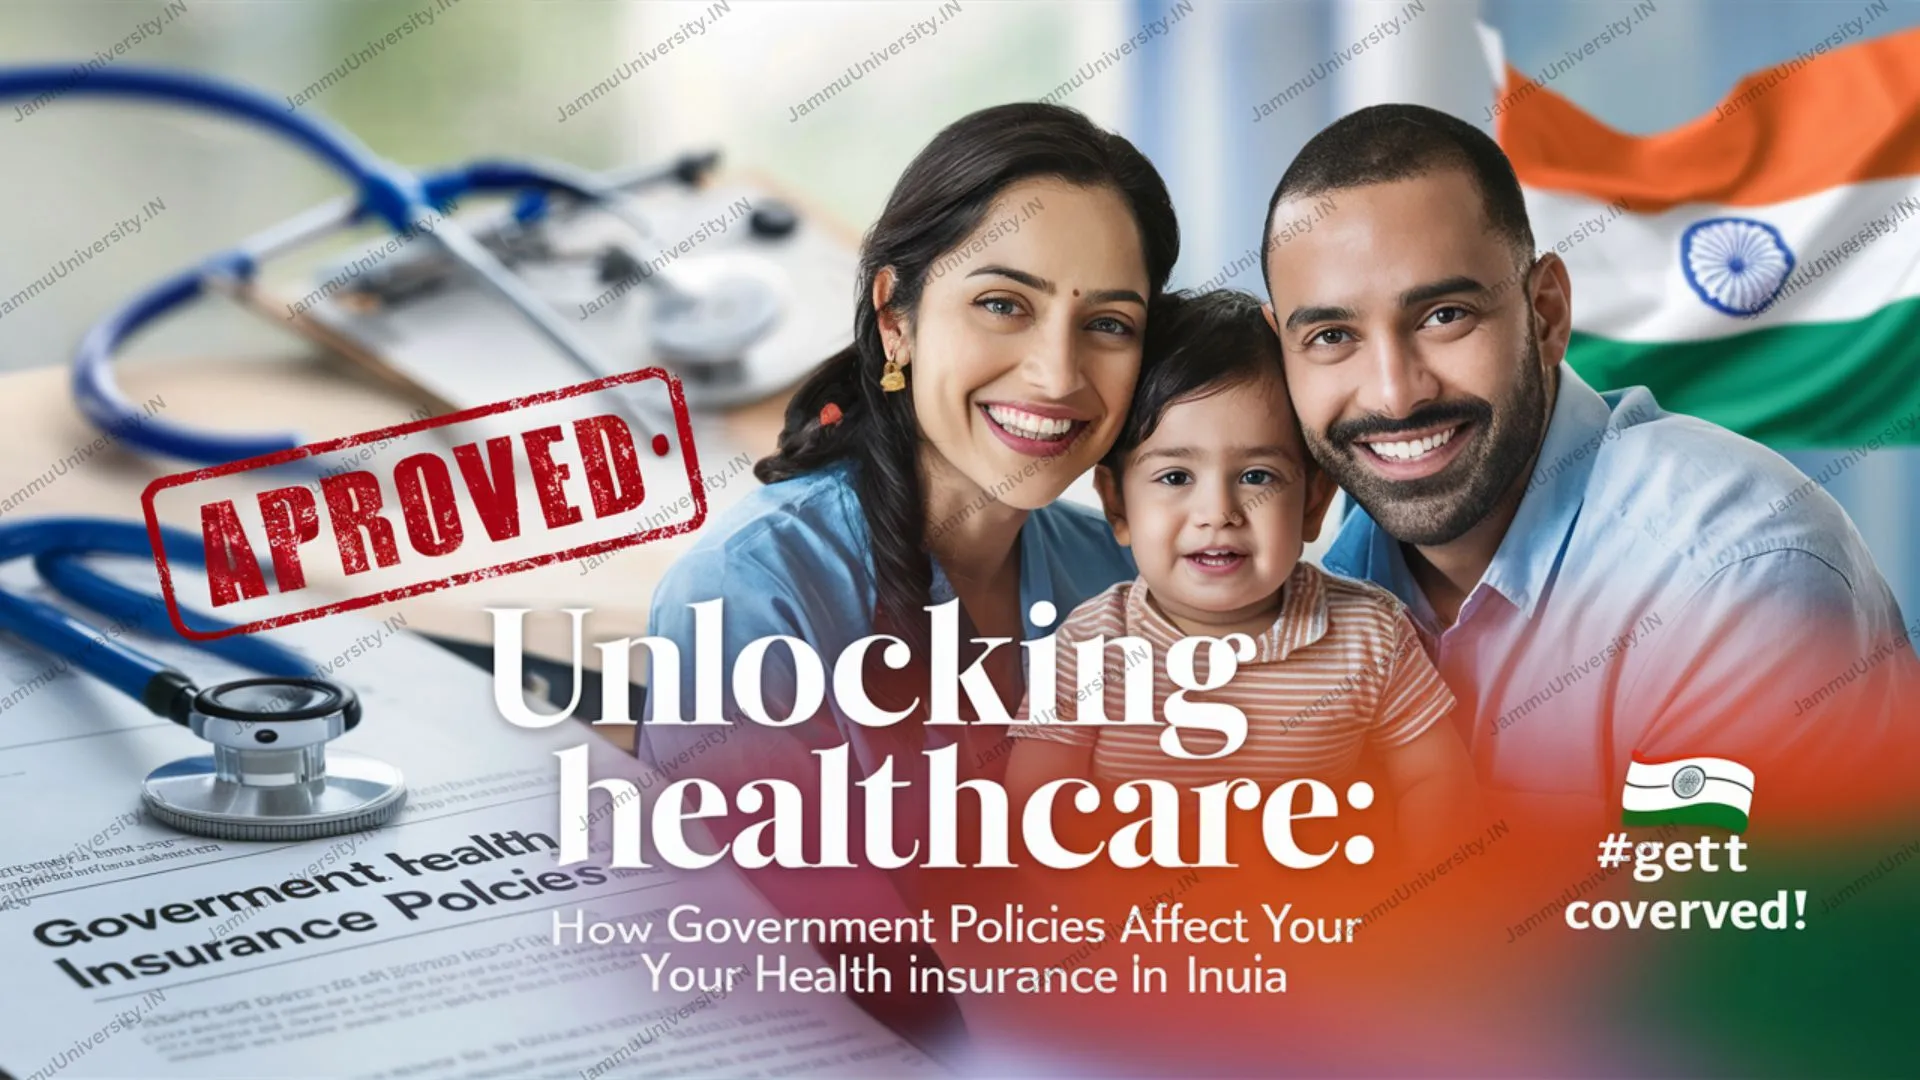 Impact of Government Policies on Health Insurance in India